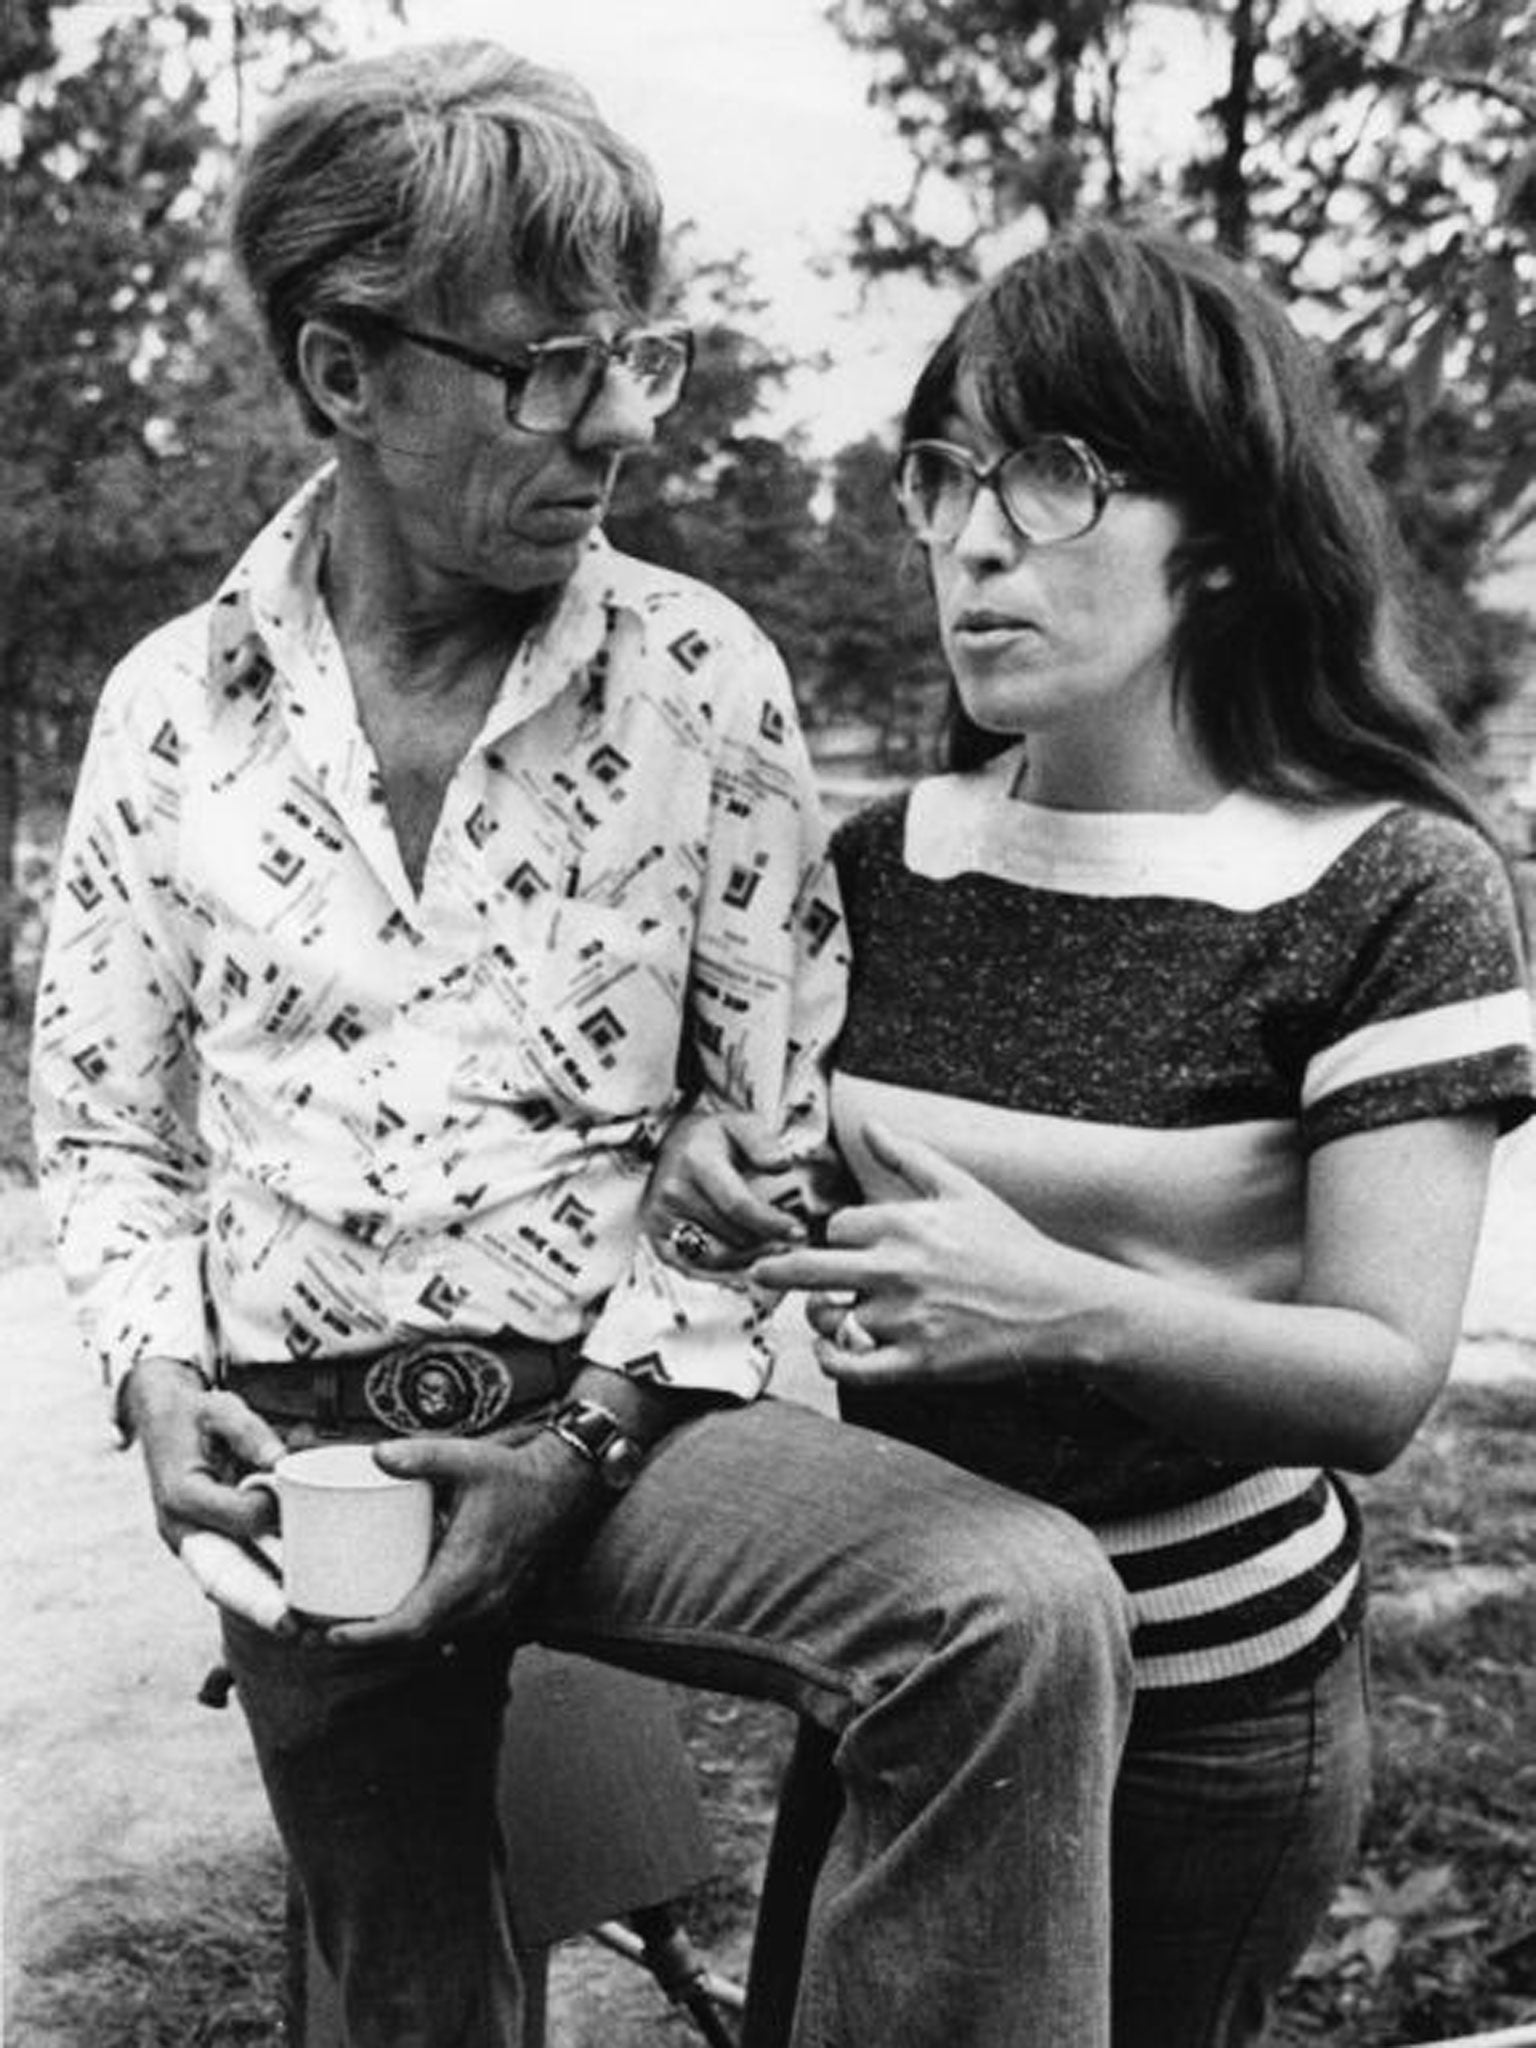 The first novel of Janet Dailey (here pictured with her husband) published in 1976 sold more than a million copies